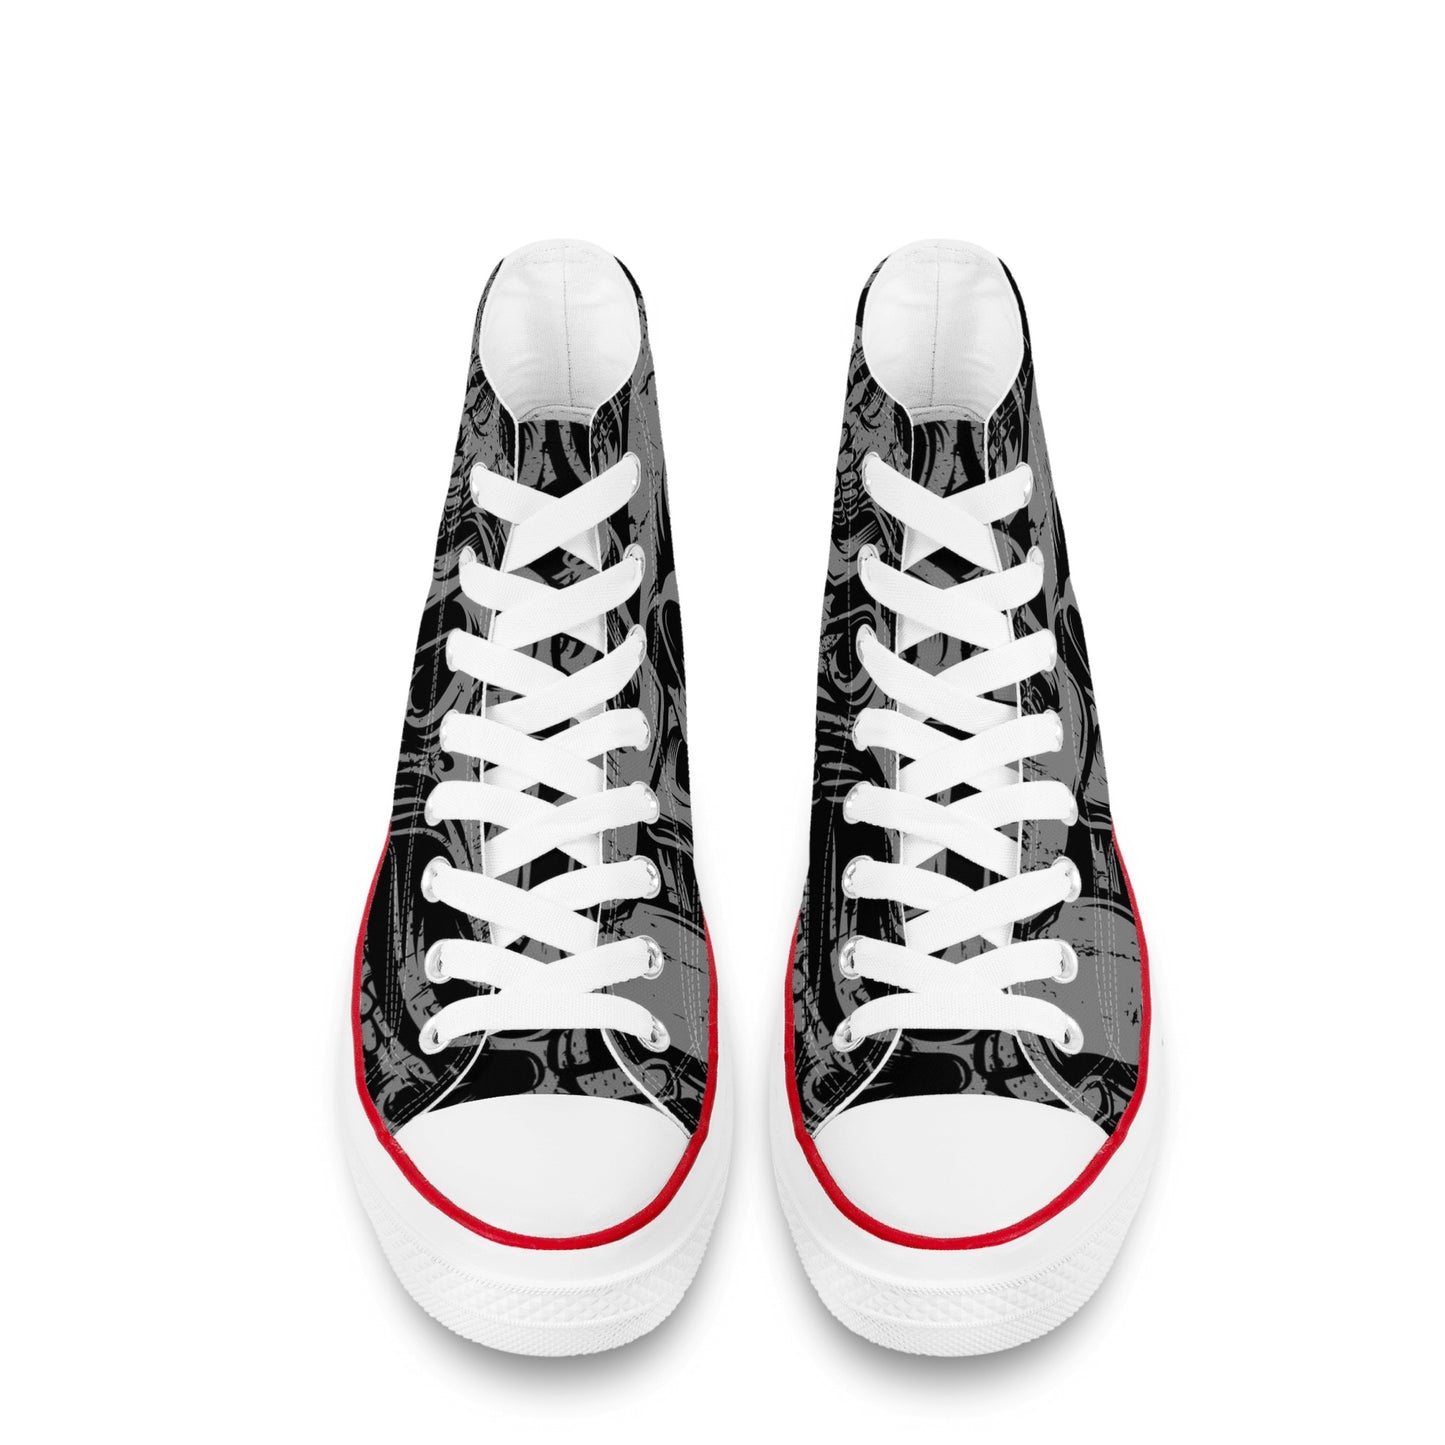 Silver Skull Classic High Top Canvas Shoes